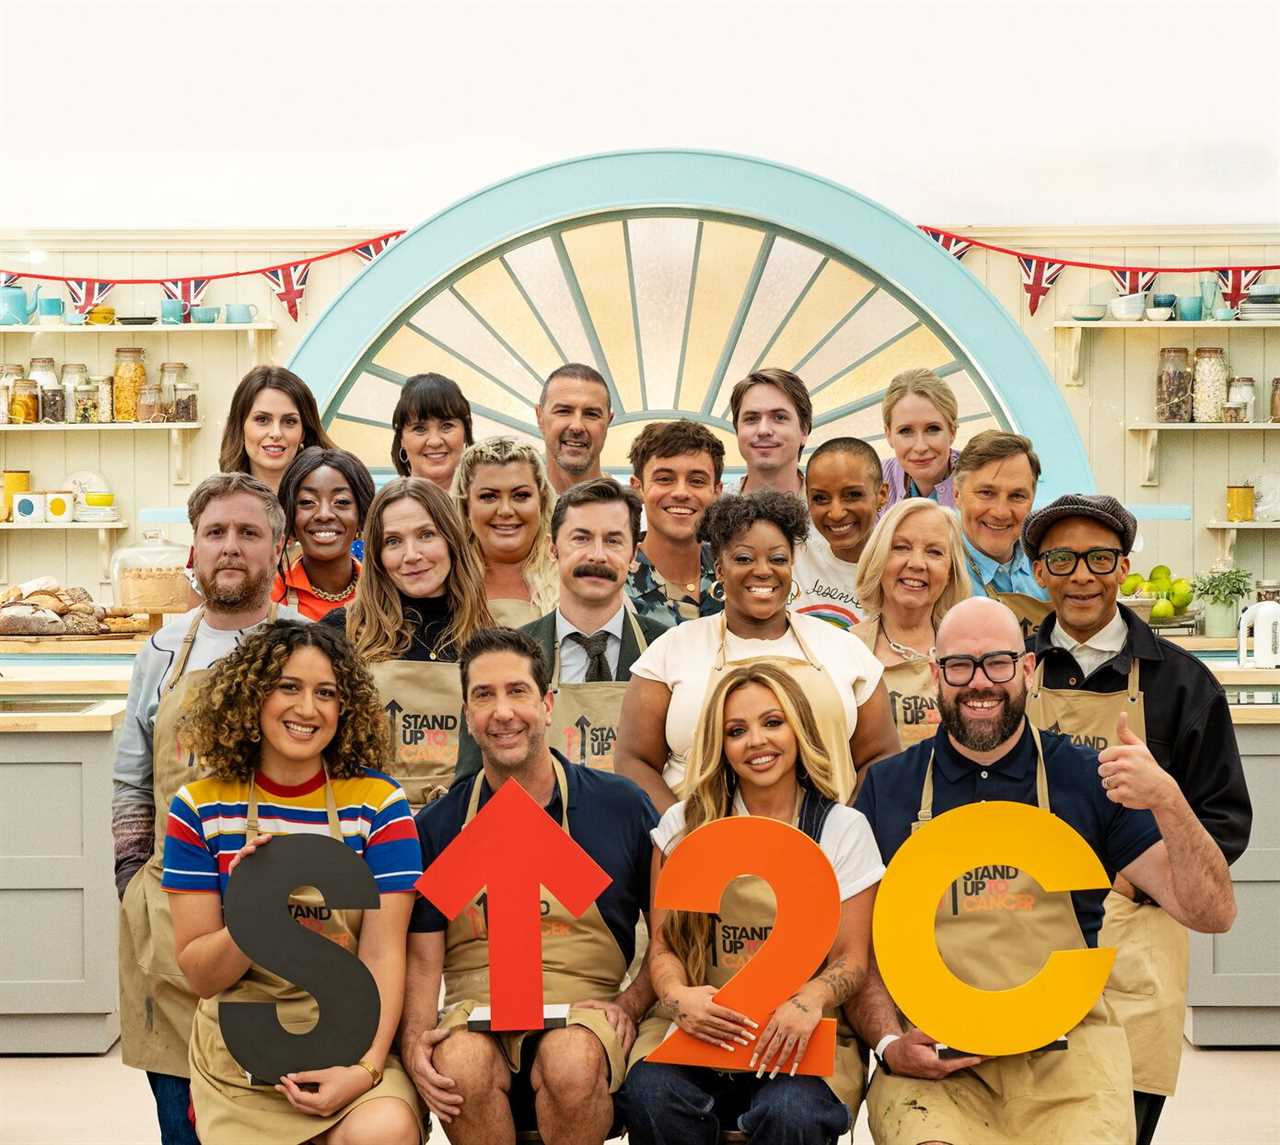 It's a stellar line-up for this year's Celeb Bake Off